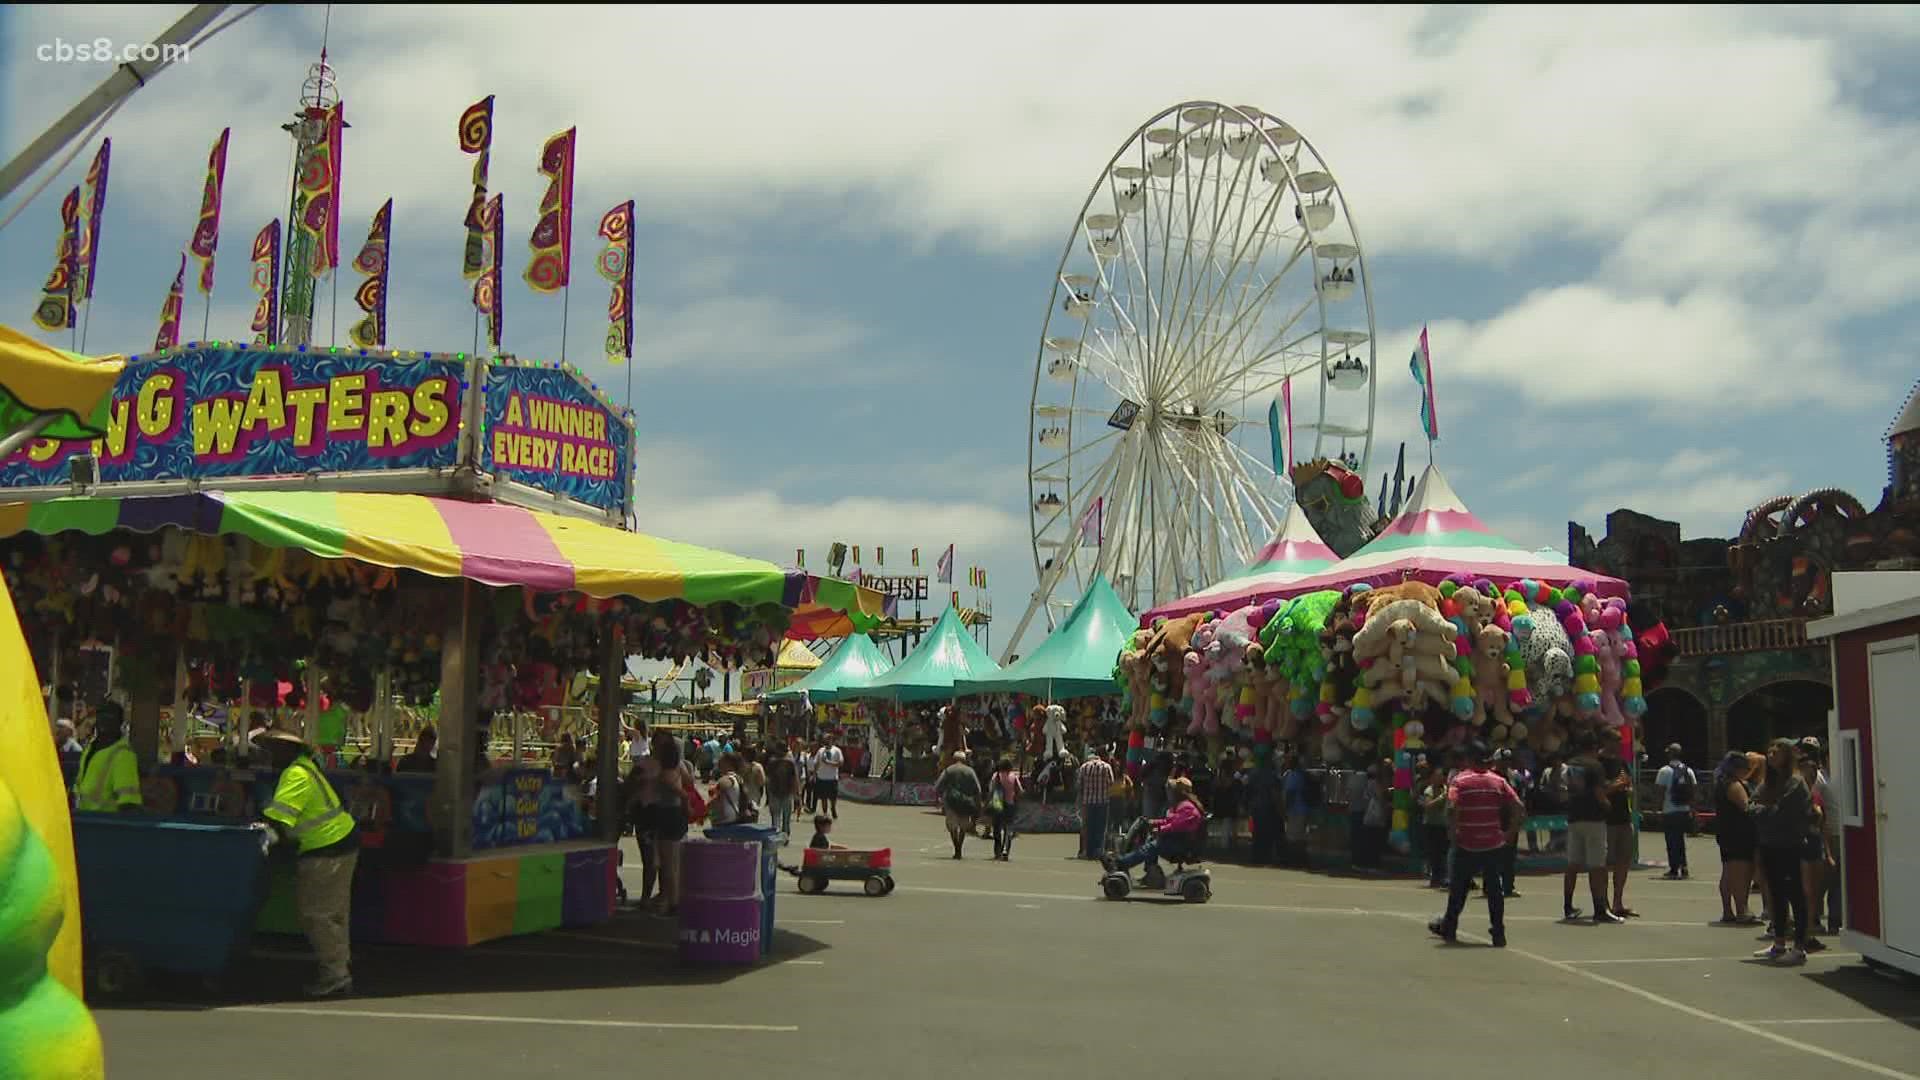 A judge has blocked fair organizers from using the company it hired to provide the fair's rides and games, ruling that the selection process was essentially rigged.